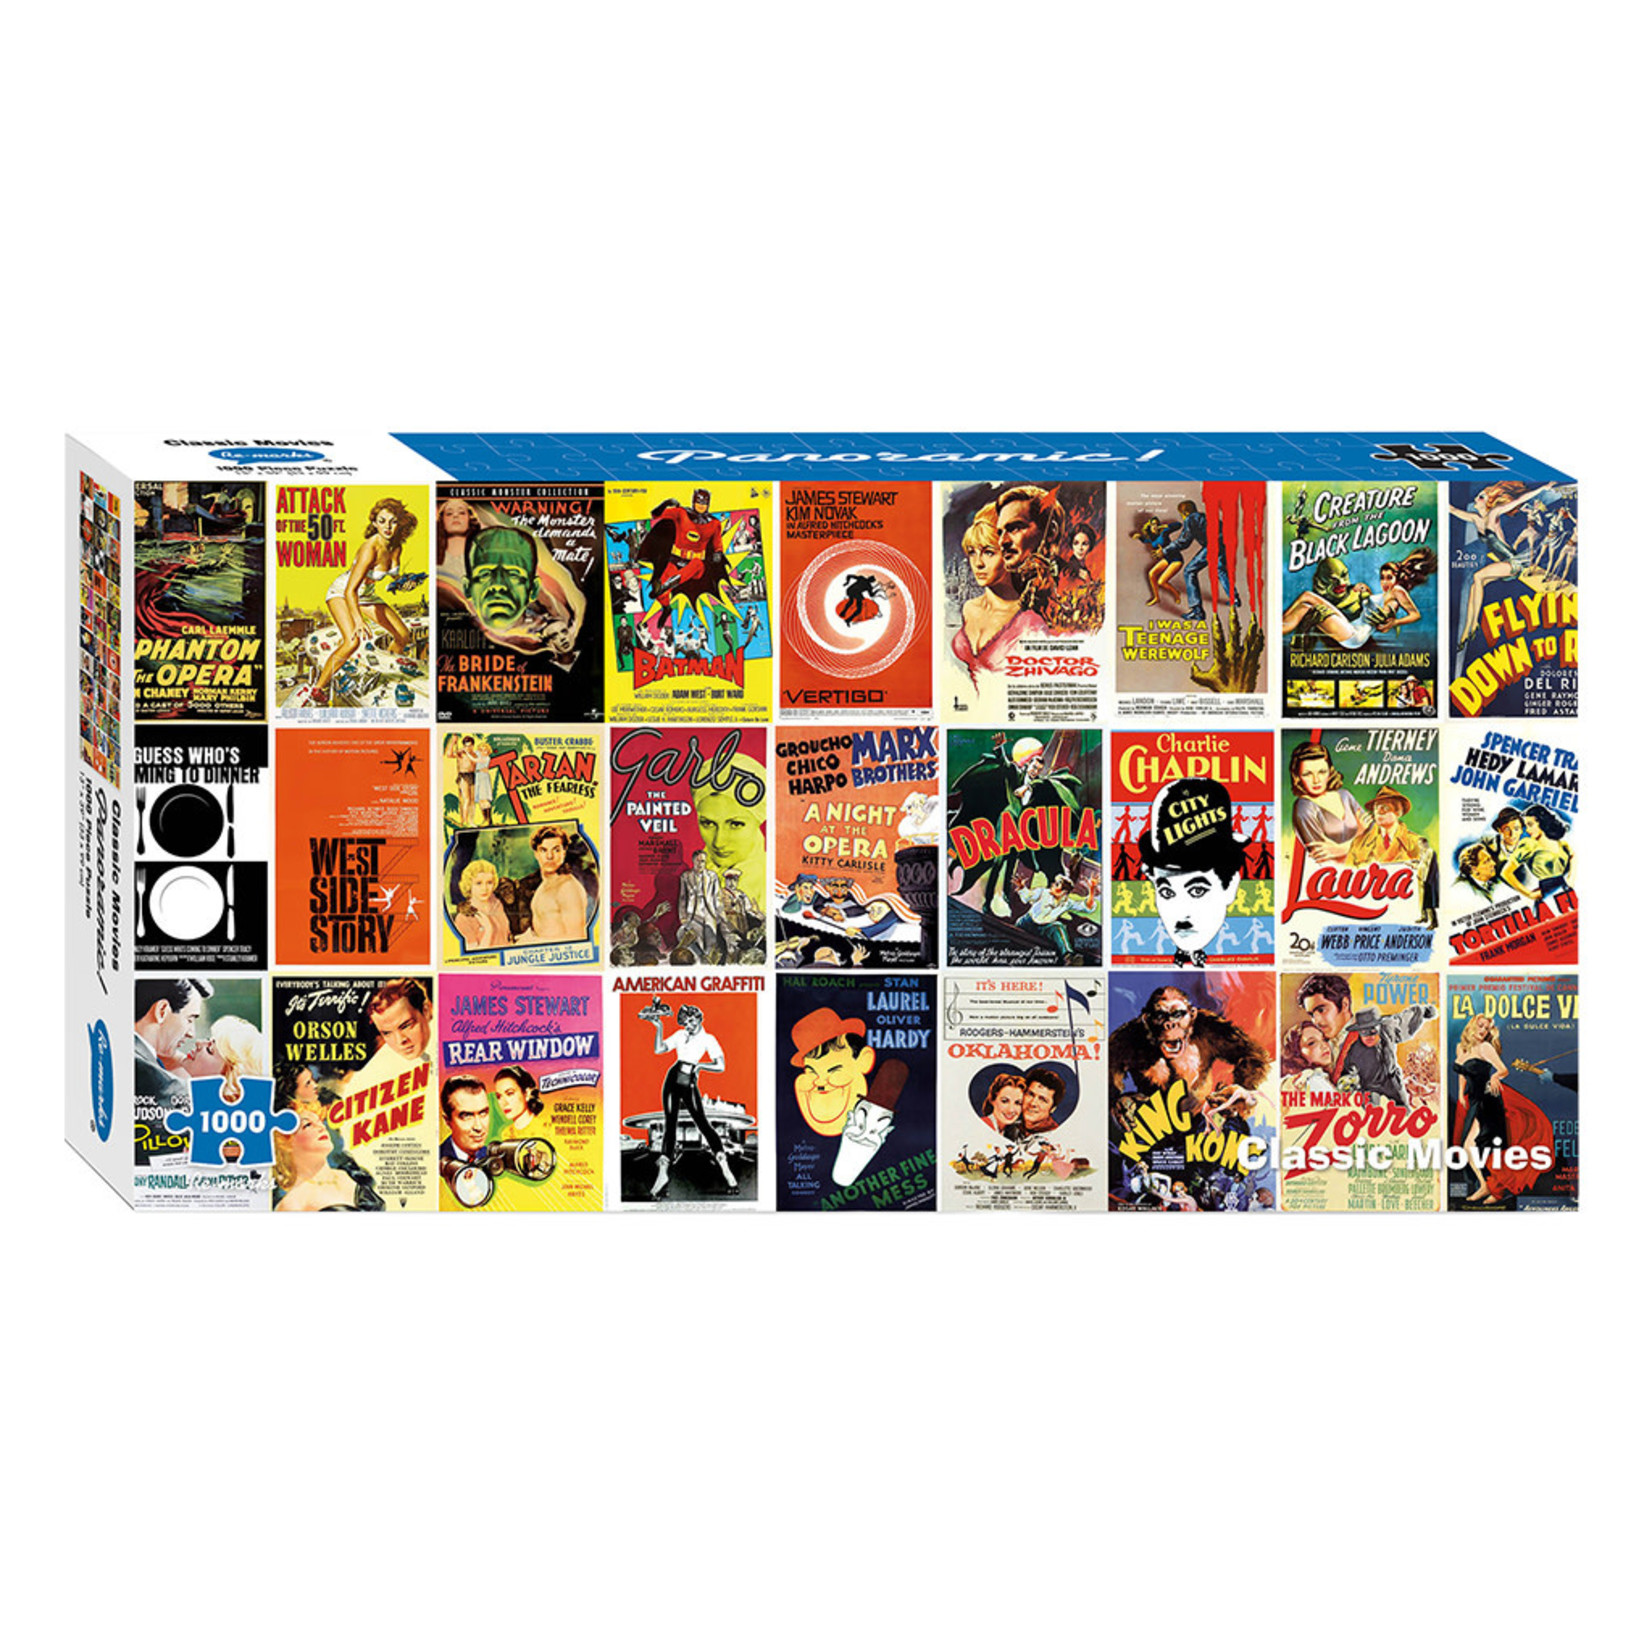 Re-Marks Panoramic Classic Movies 1000pc